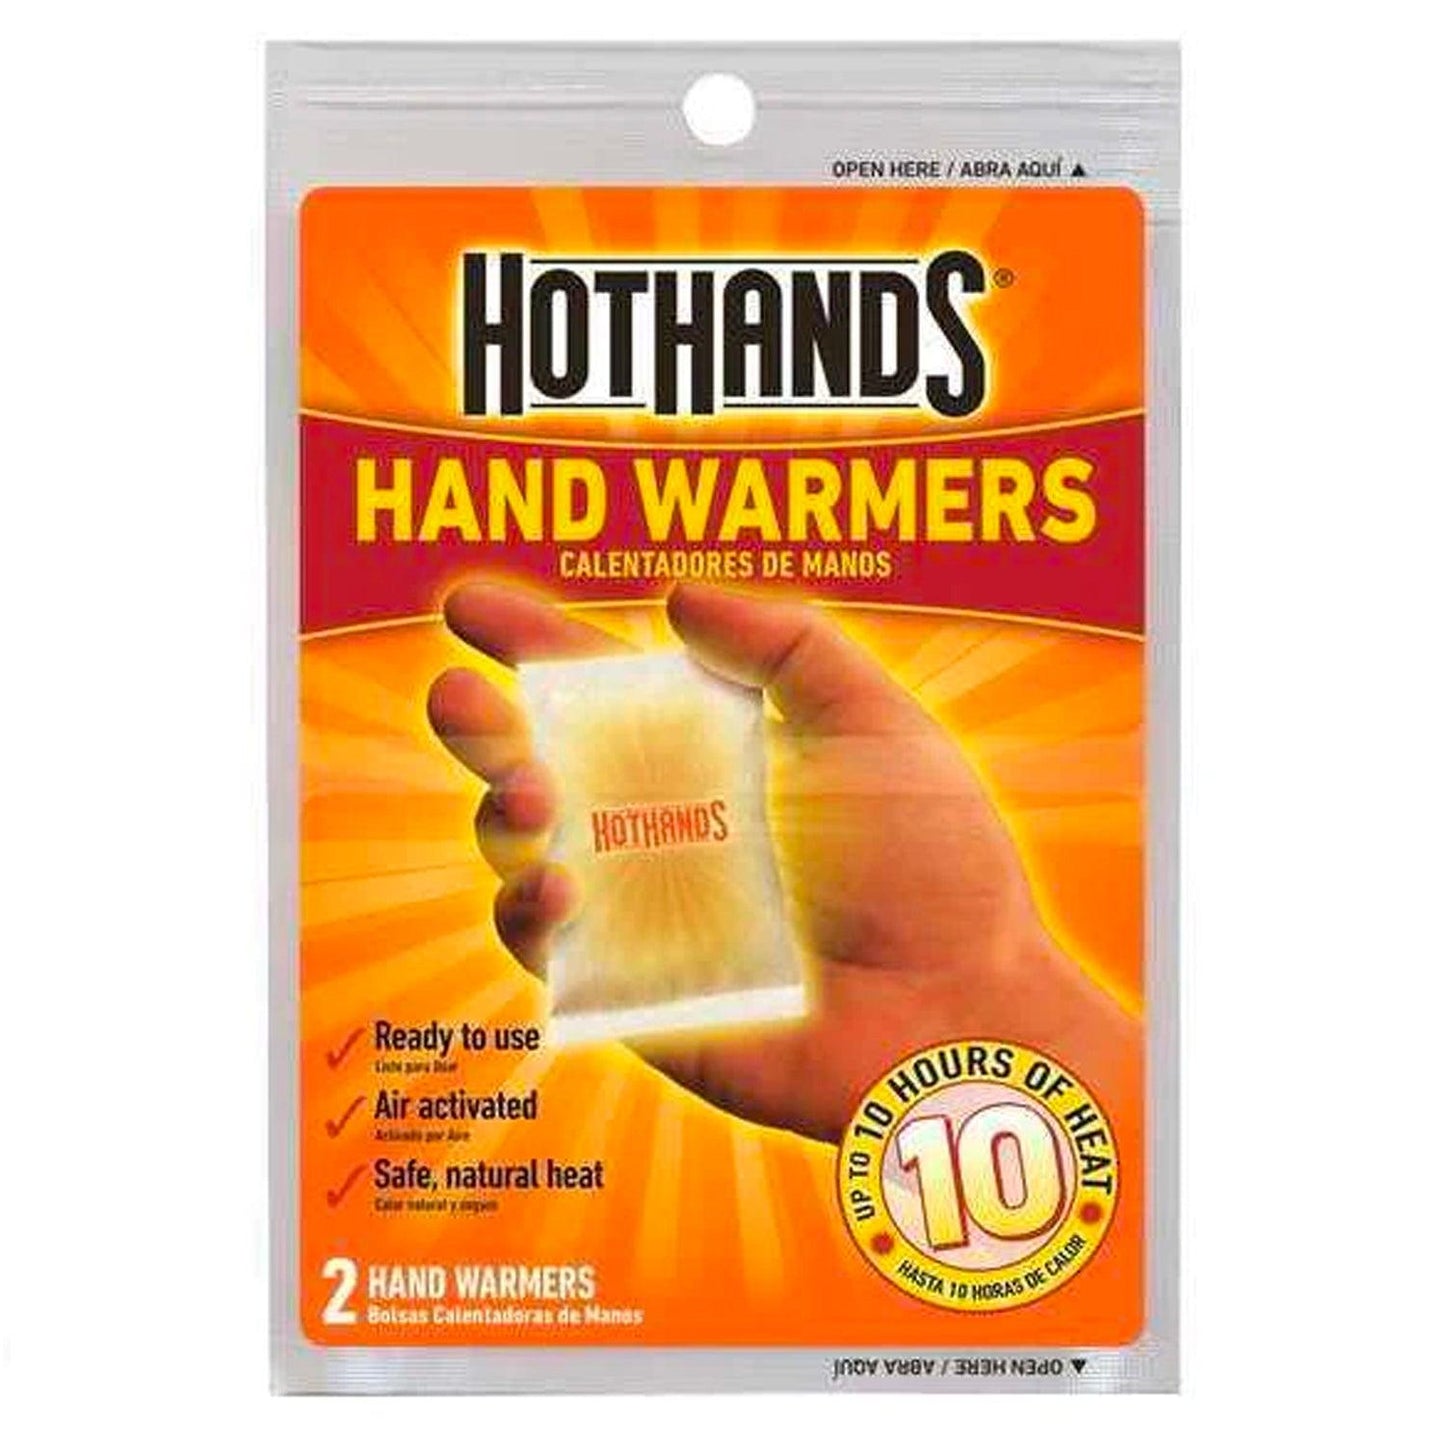 HotHands Hand Warmers - Long Lasting Safe Natural Odorless Air Activated Warmers - Up to 10 Hours of Heat - 40 Pair Box